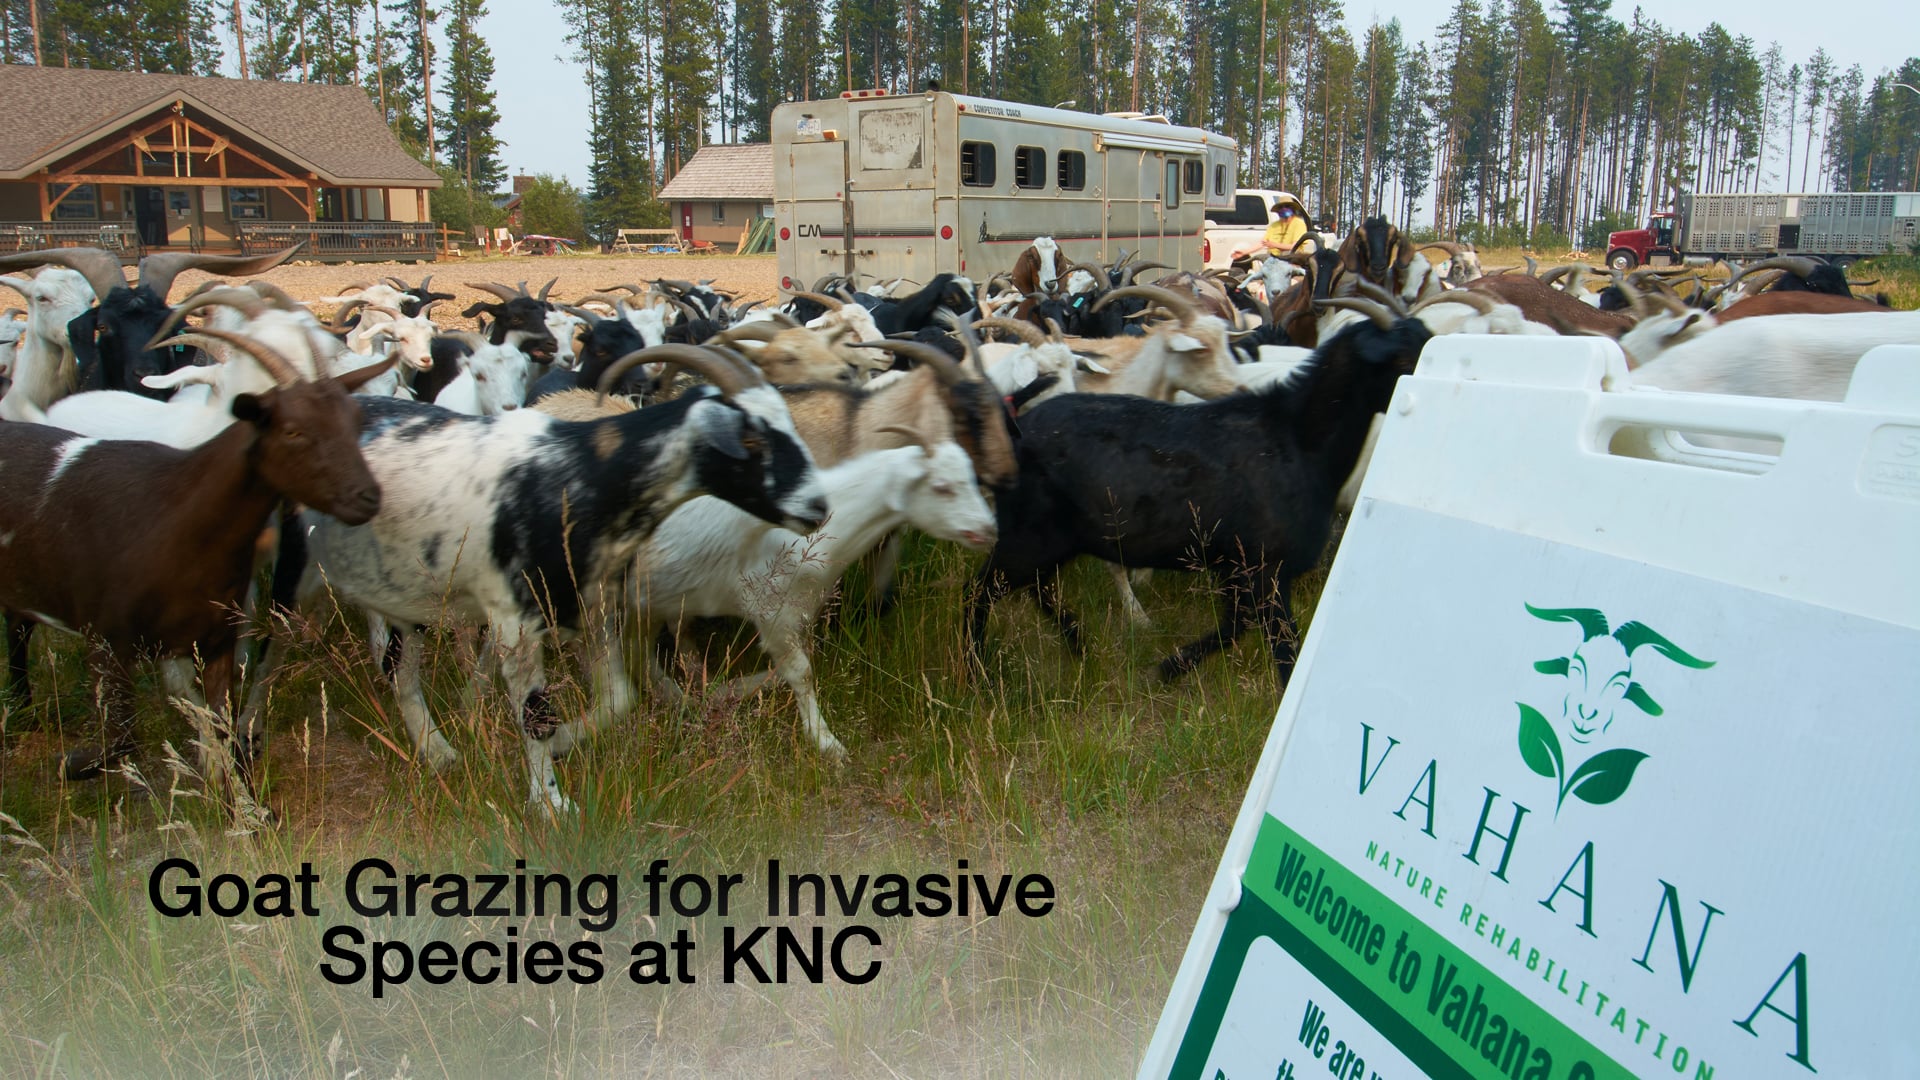 Goat Grazing for Invasive Species at KNC